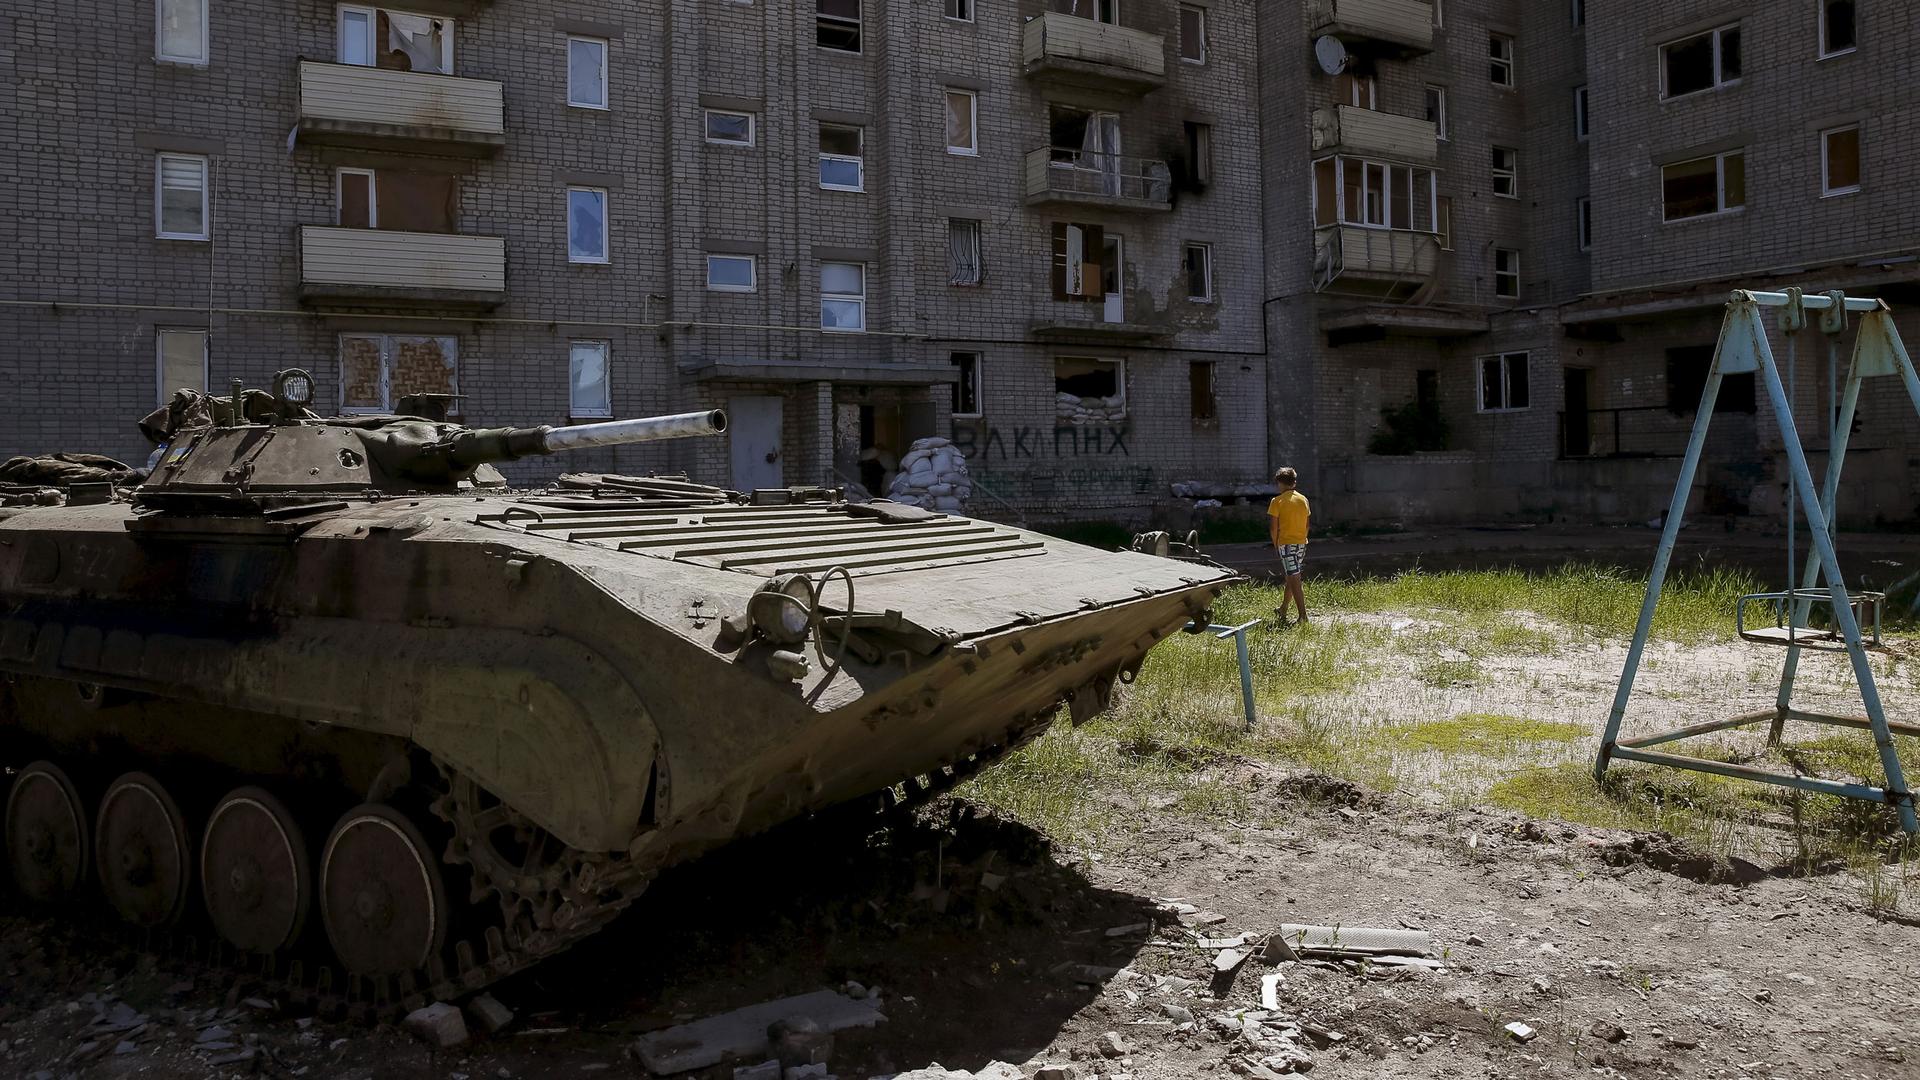 A boy walks near a Soviet-era apartment building, with a tank in the foreground